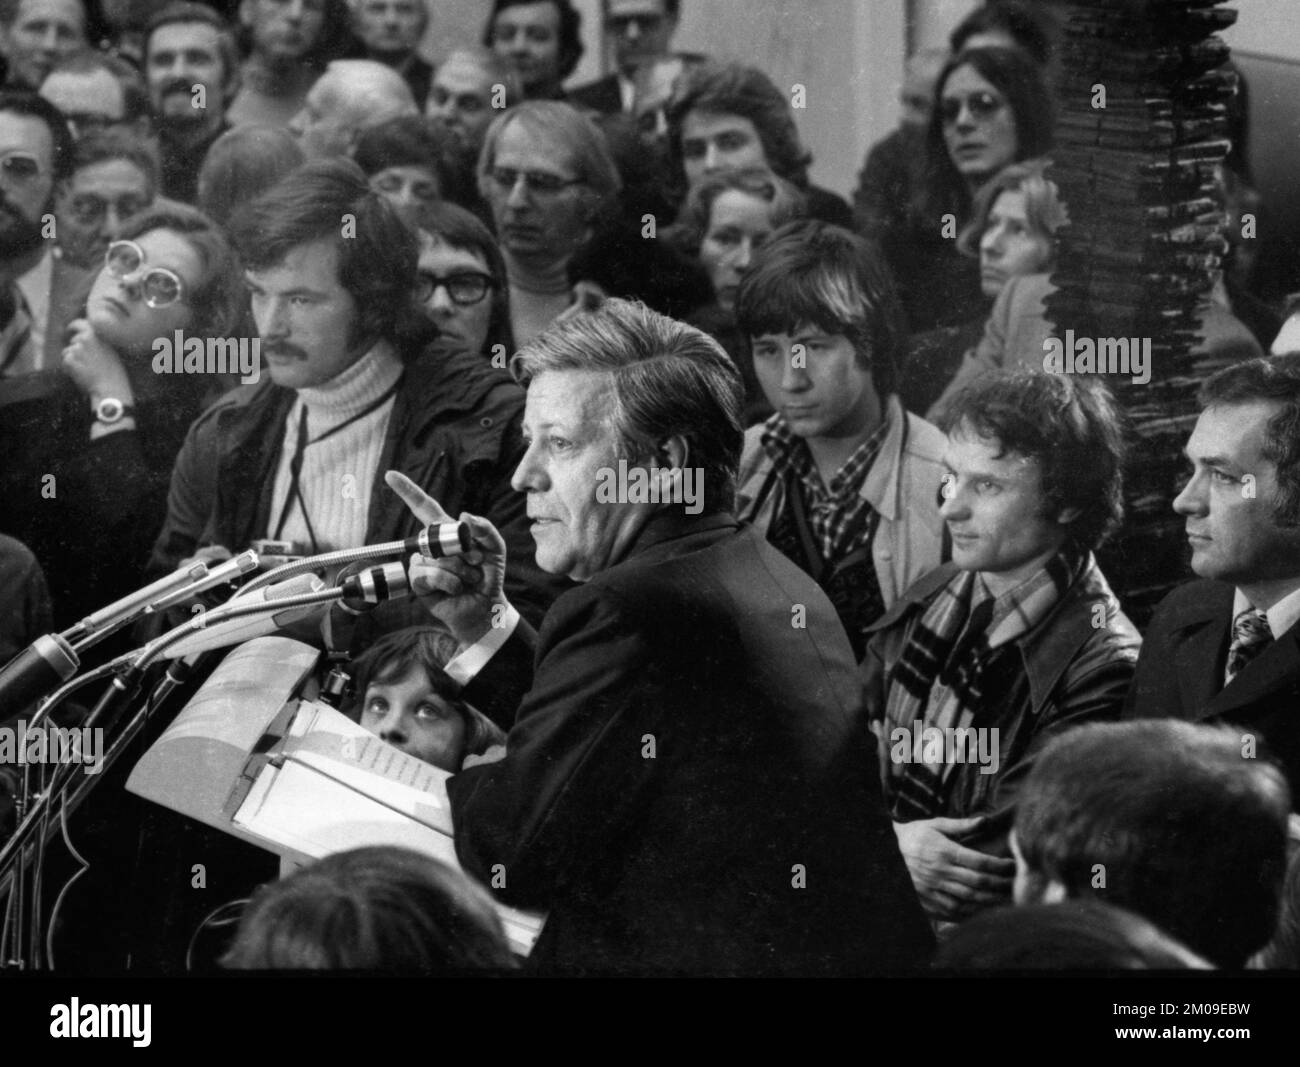 Federal Chancellor Helmut Schmidt opened an art exhibition at the Ostwall Museum in Dortmund on 11.4.1975, Germany, Europe Stock Photo